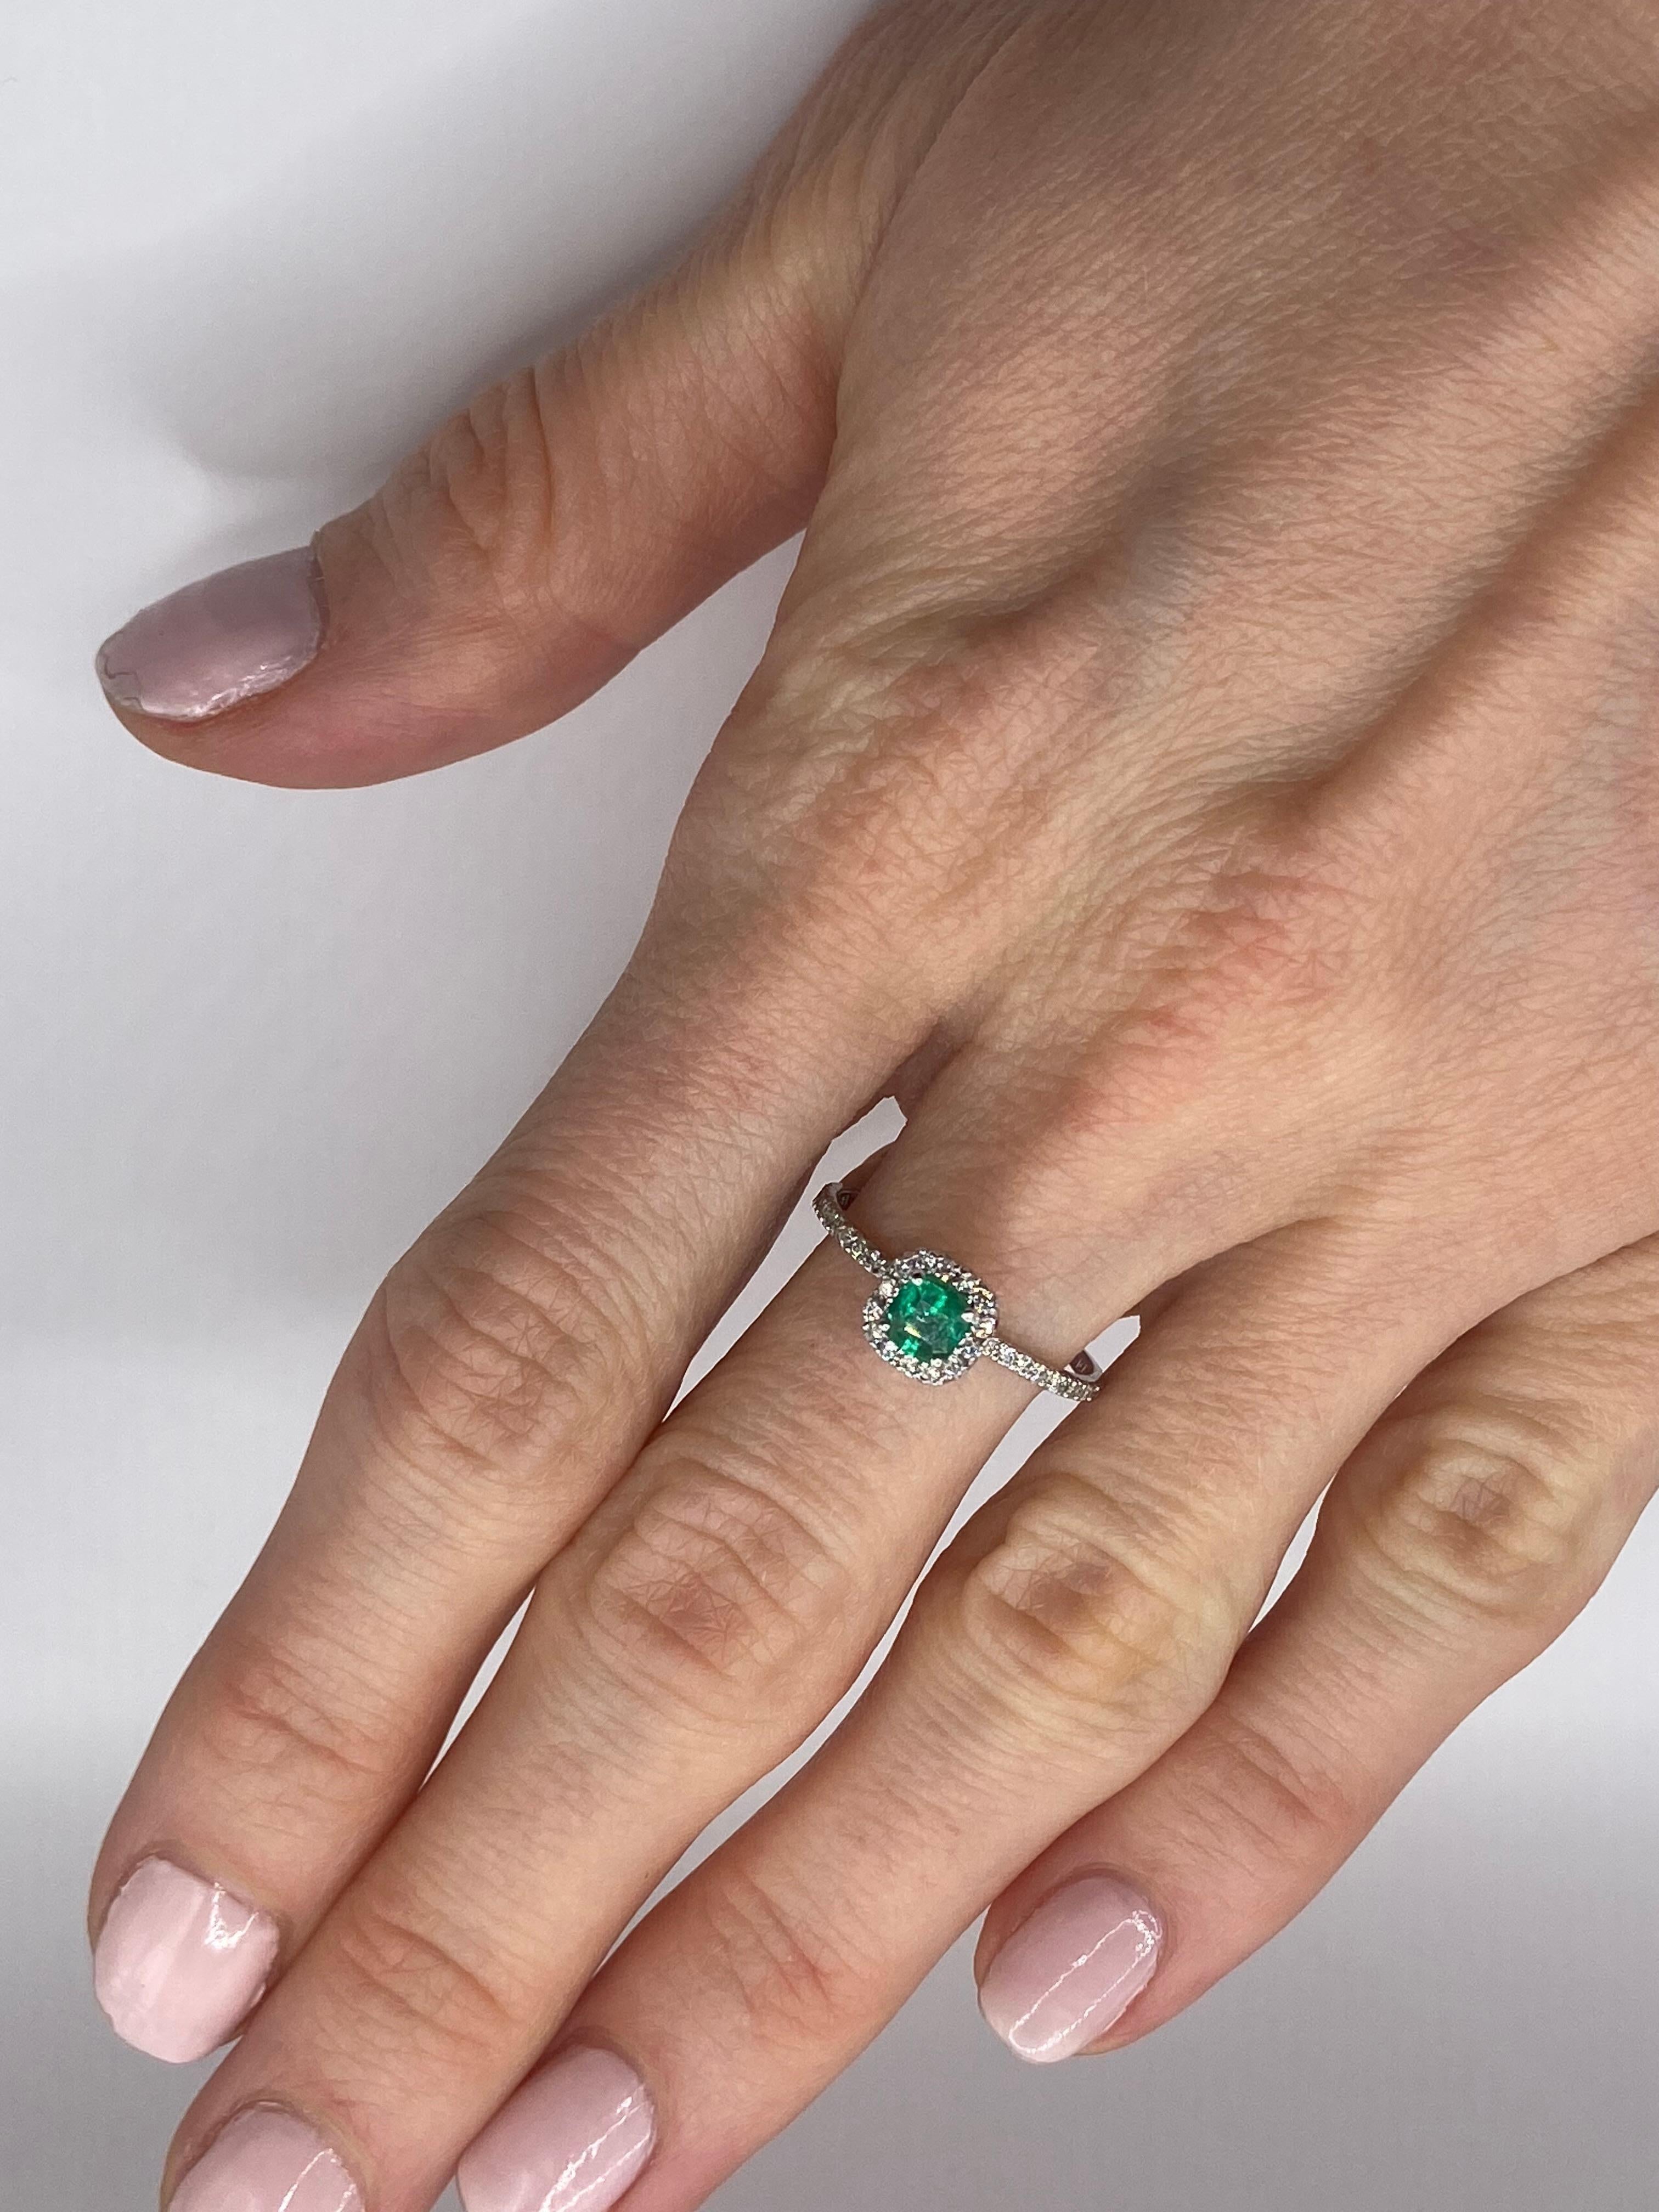 0.59ctw Cushion Cut Emerald & Round Diamond Petite Ring in 14KT White Gold For Sale 4